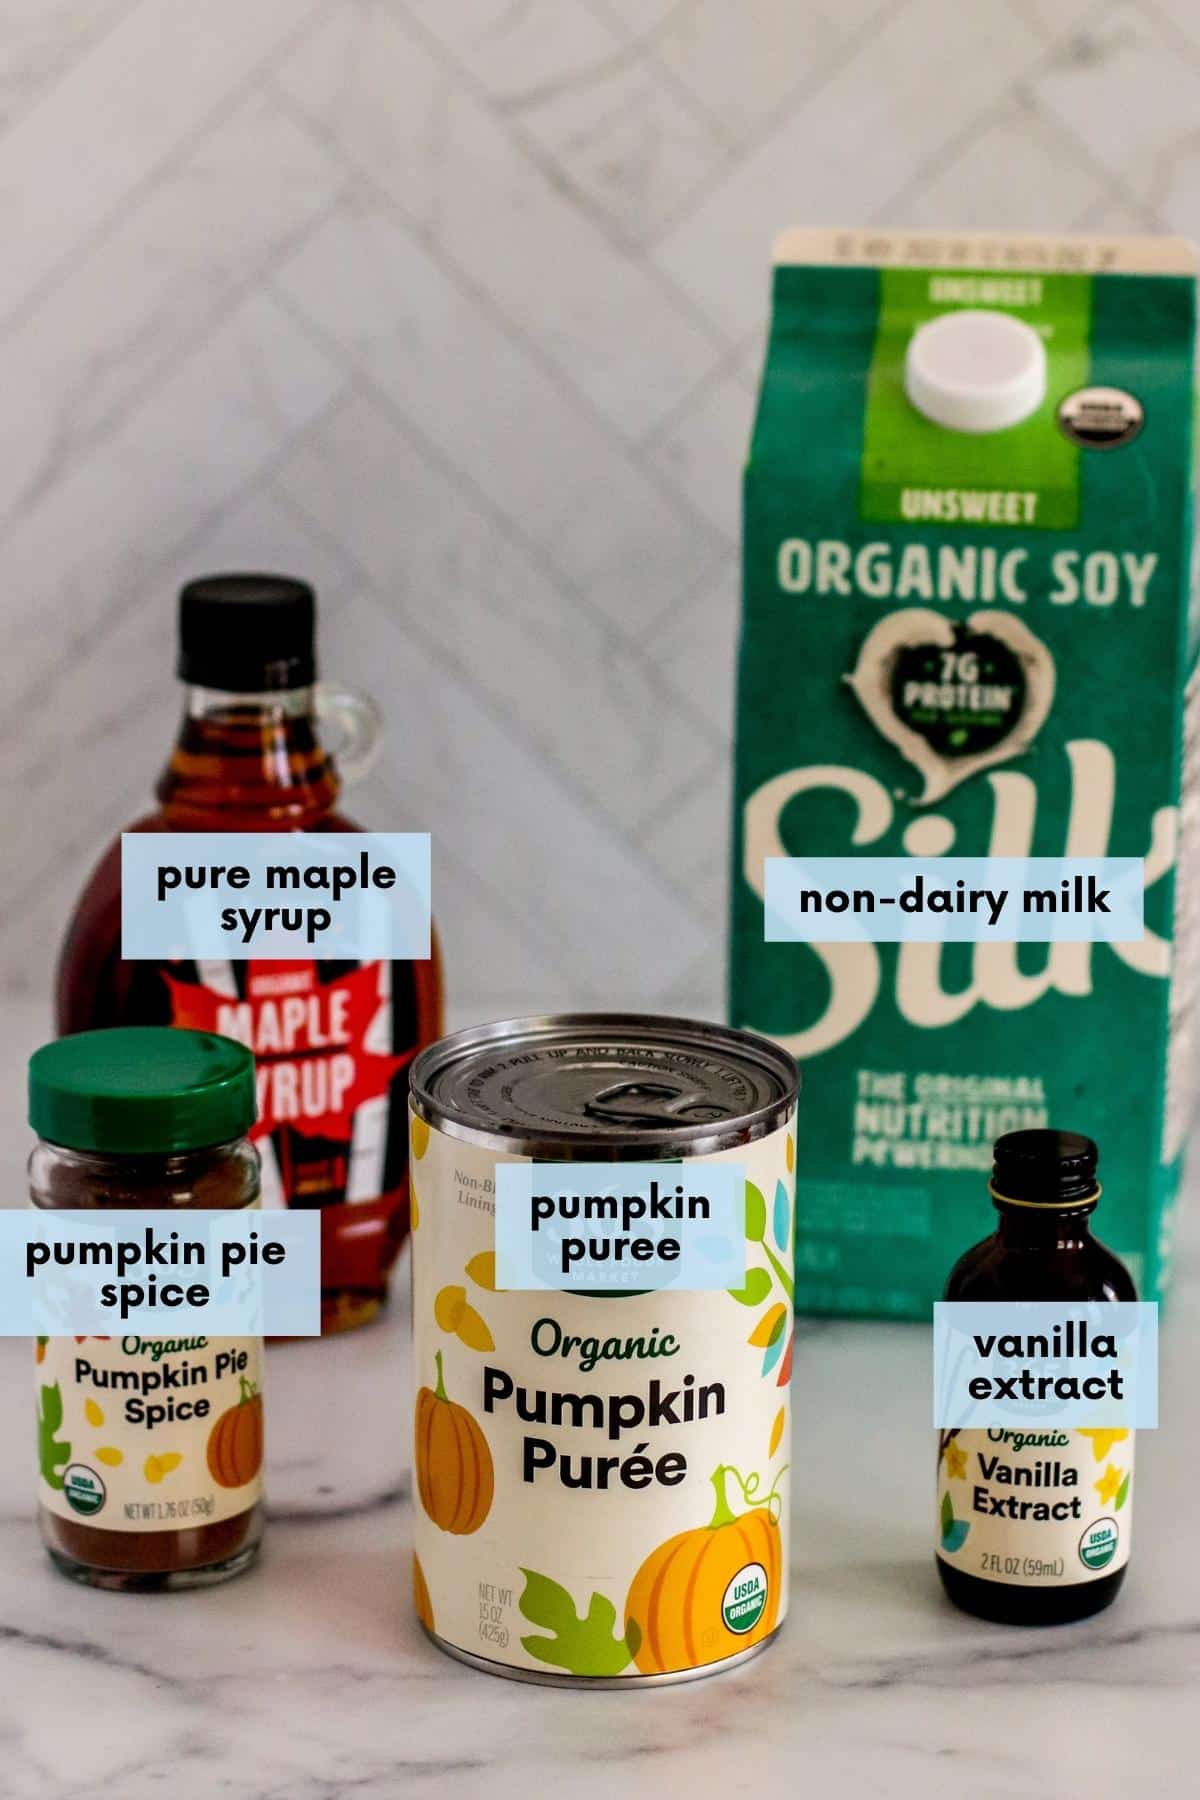 Labeled ingredients: Bottle of pure maple syrup, carton of non-dairy milk, bottle of pumpkin pie spice, can of pumpkin puree, and bottle of vanilla extract.